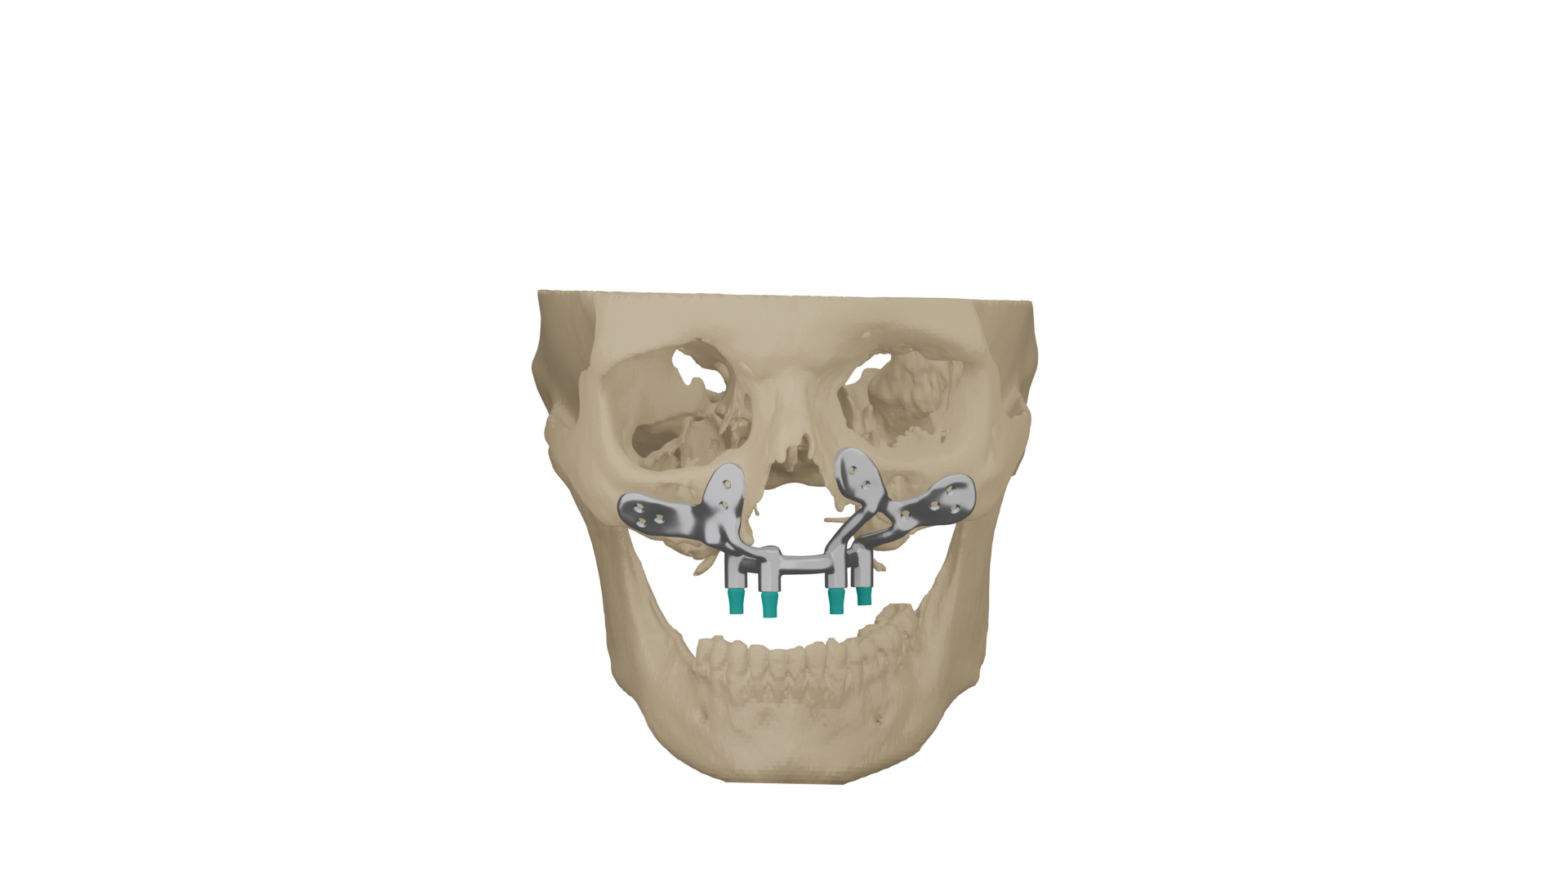 Patient-specific maxilla implant by Jajal Medical